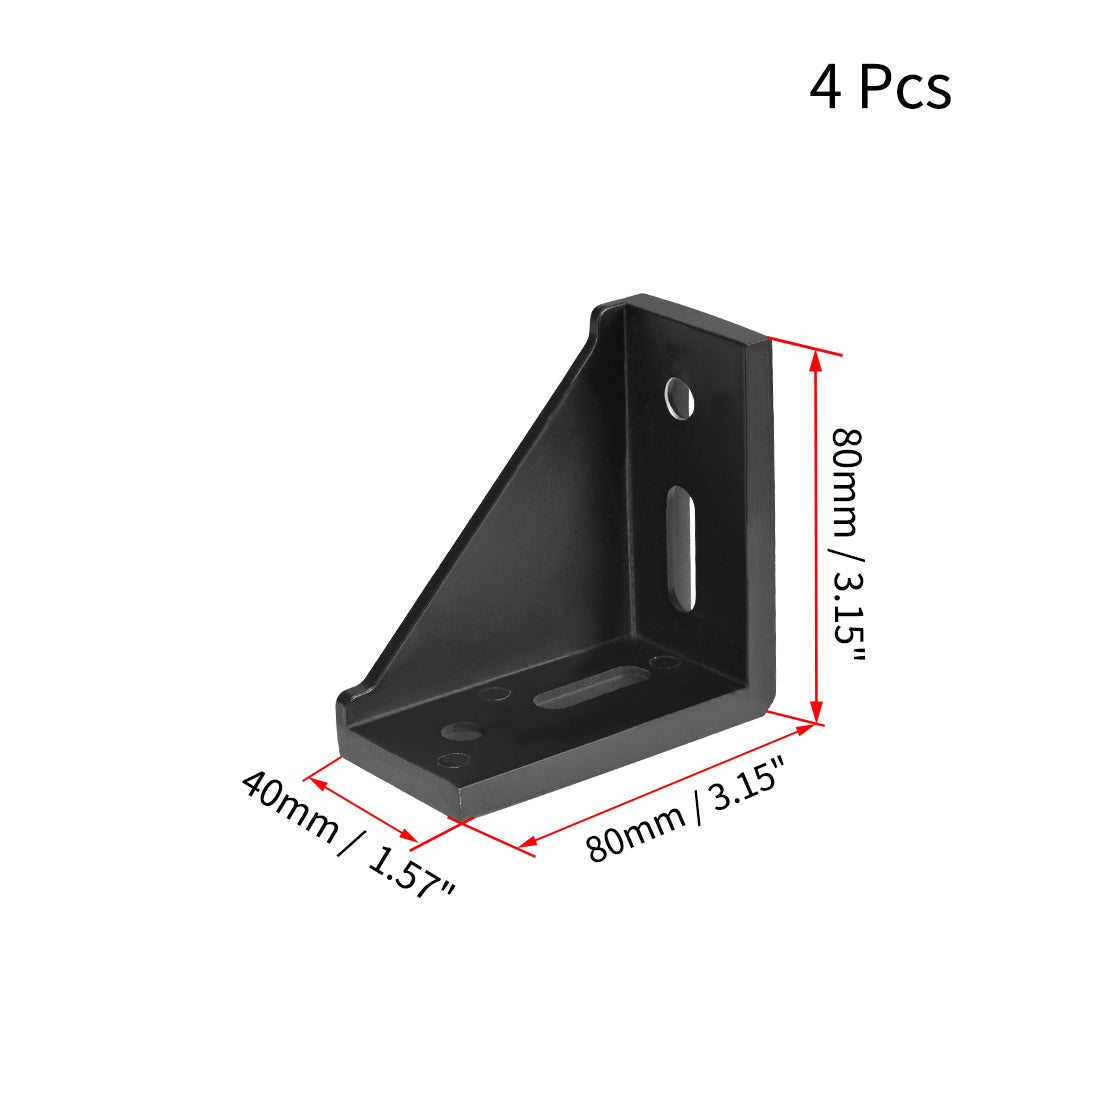 uxcell Uxcell Inside Corner Bracket Gusset, 80mm x 80mm for 4040 Series Aluminum Extrusion Profile with Slot 8mm, 4 Pcs (Black)